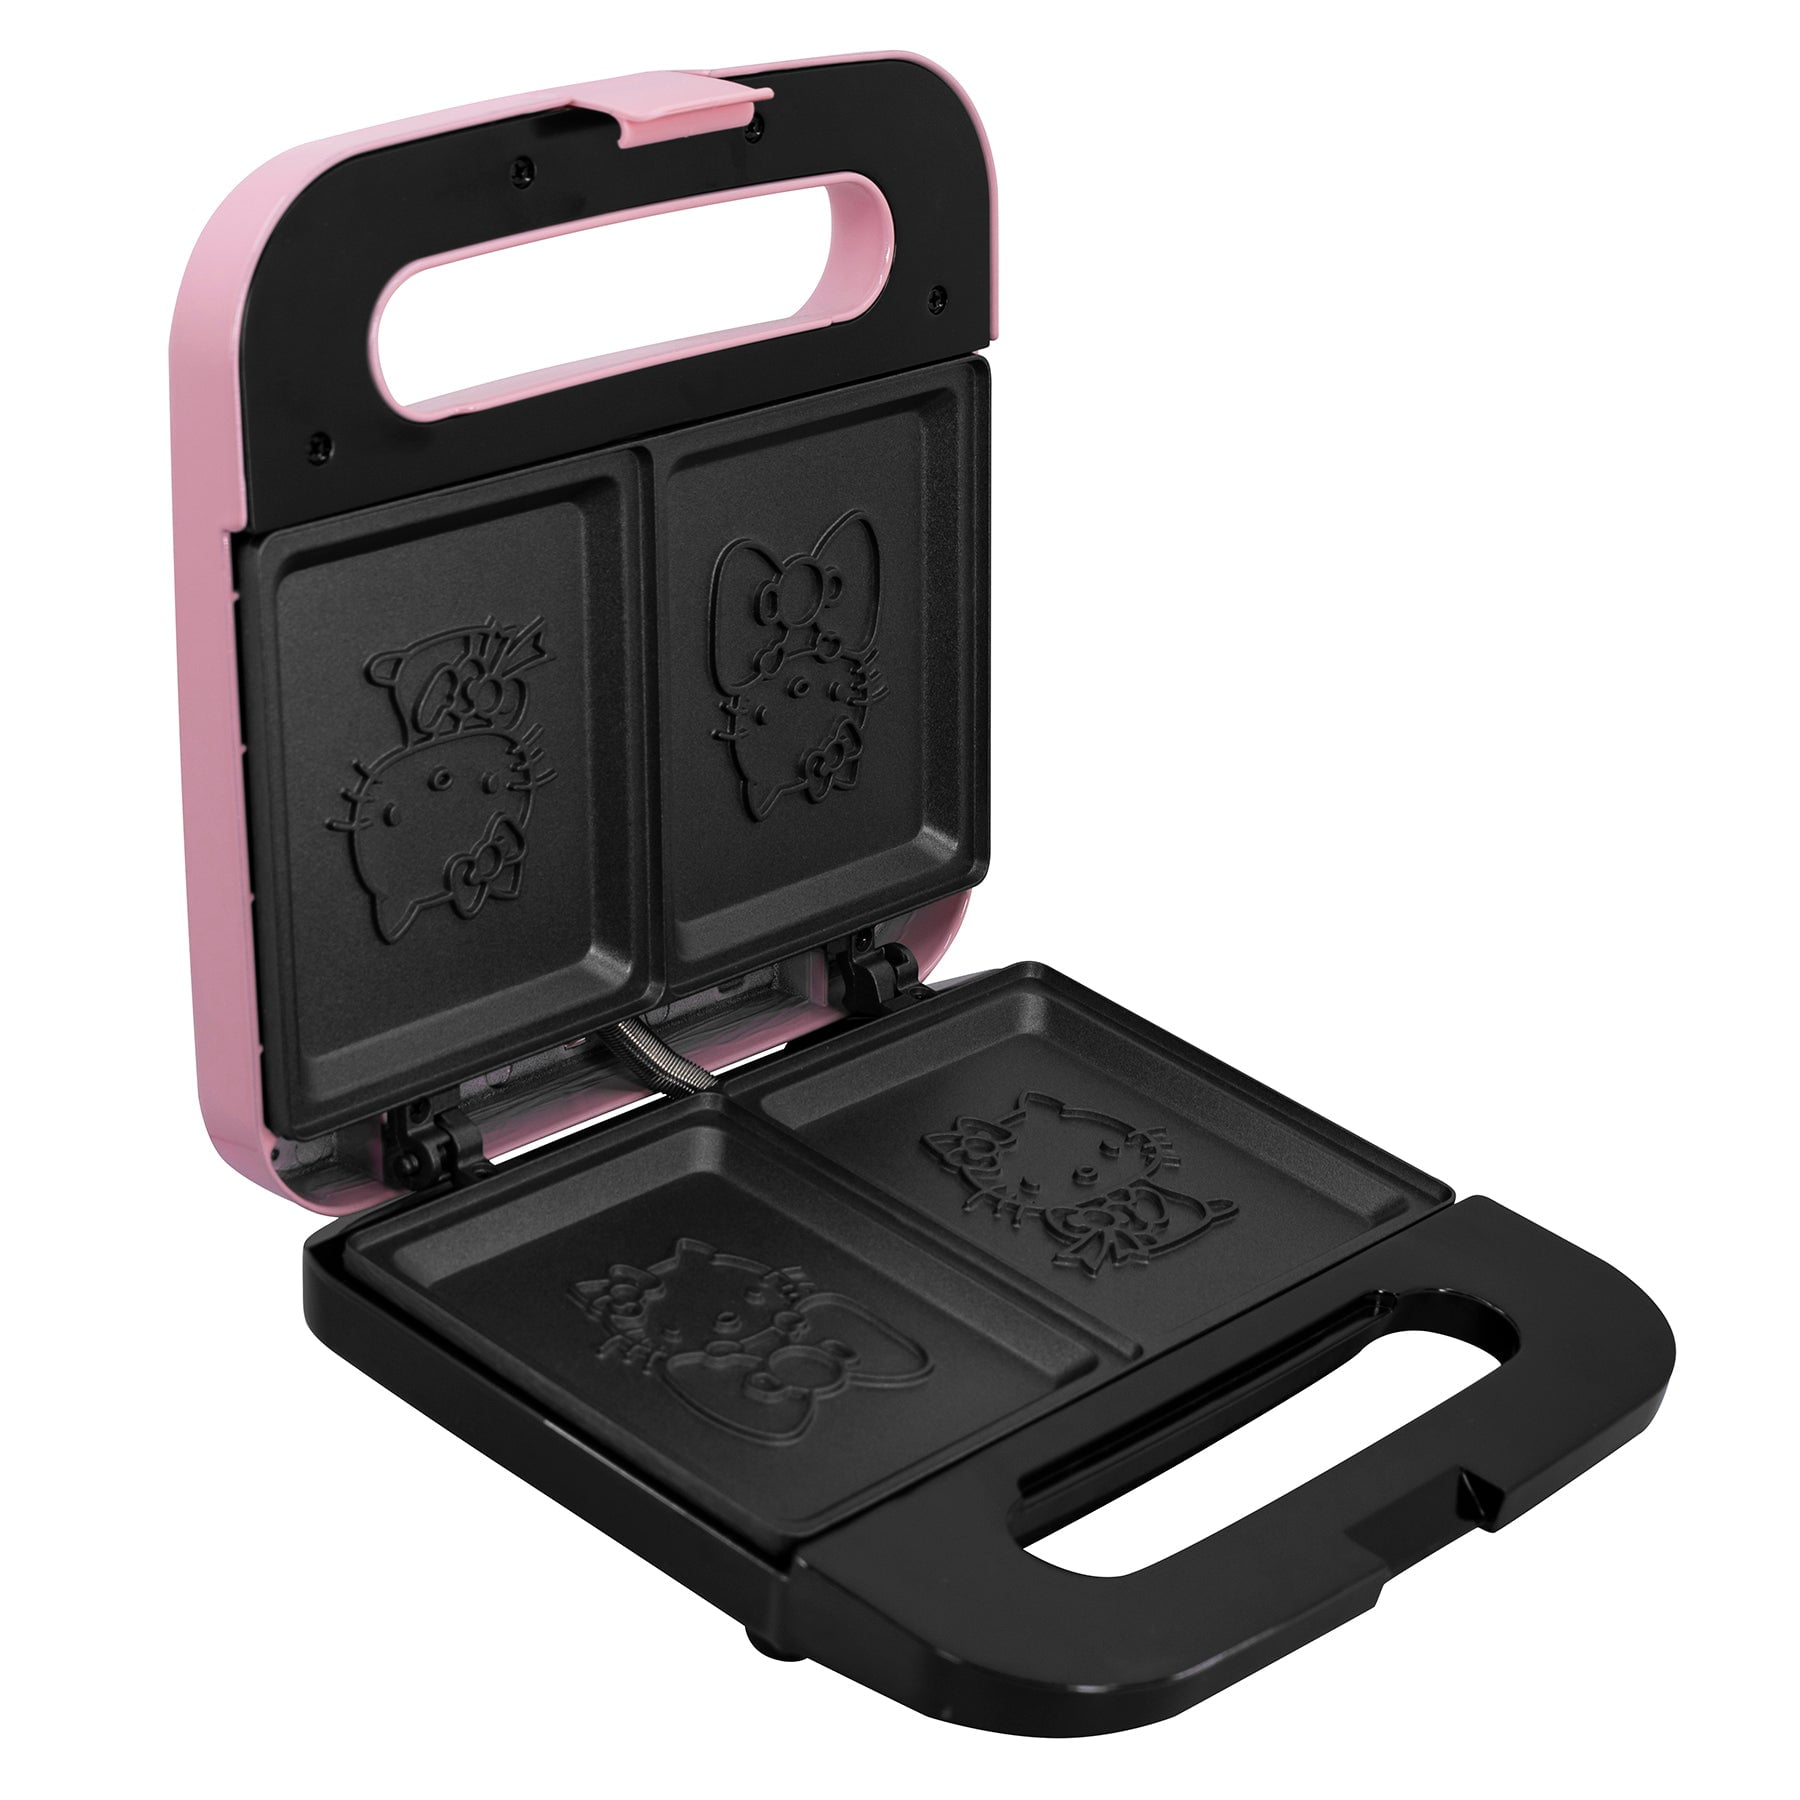 Uncanny Brands Hello Kitty Grilled Cheese Maker- Panini Press and Compact  Indoor Grill